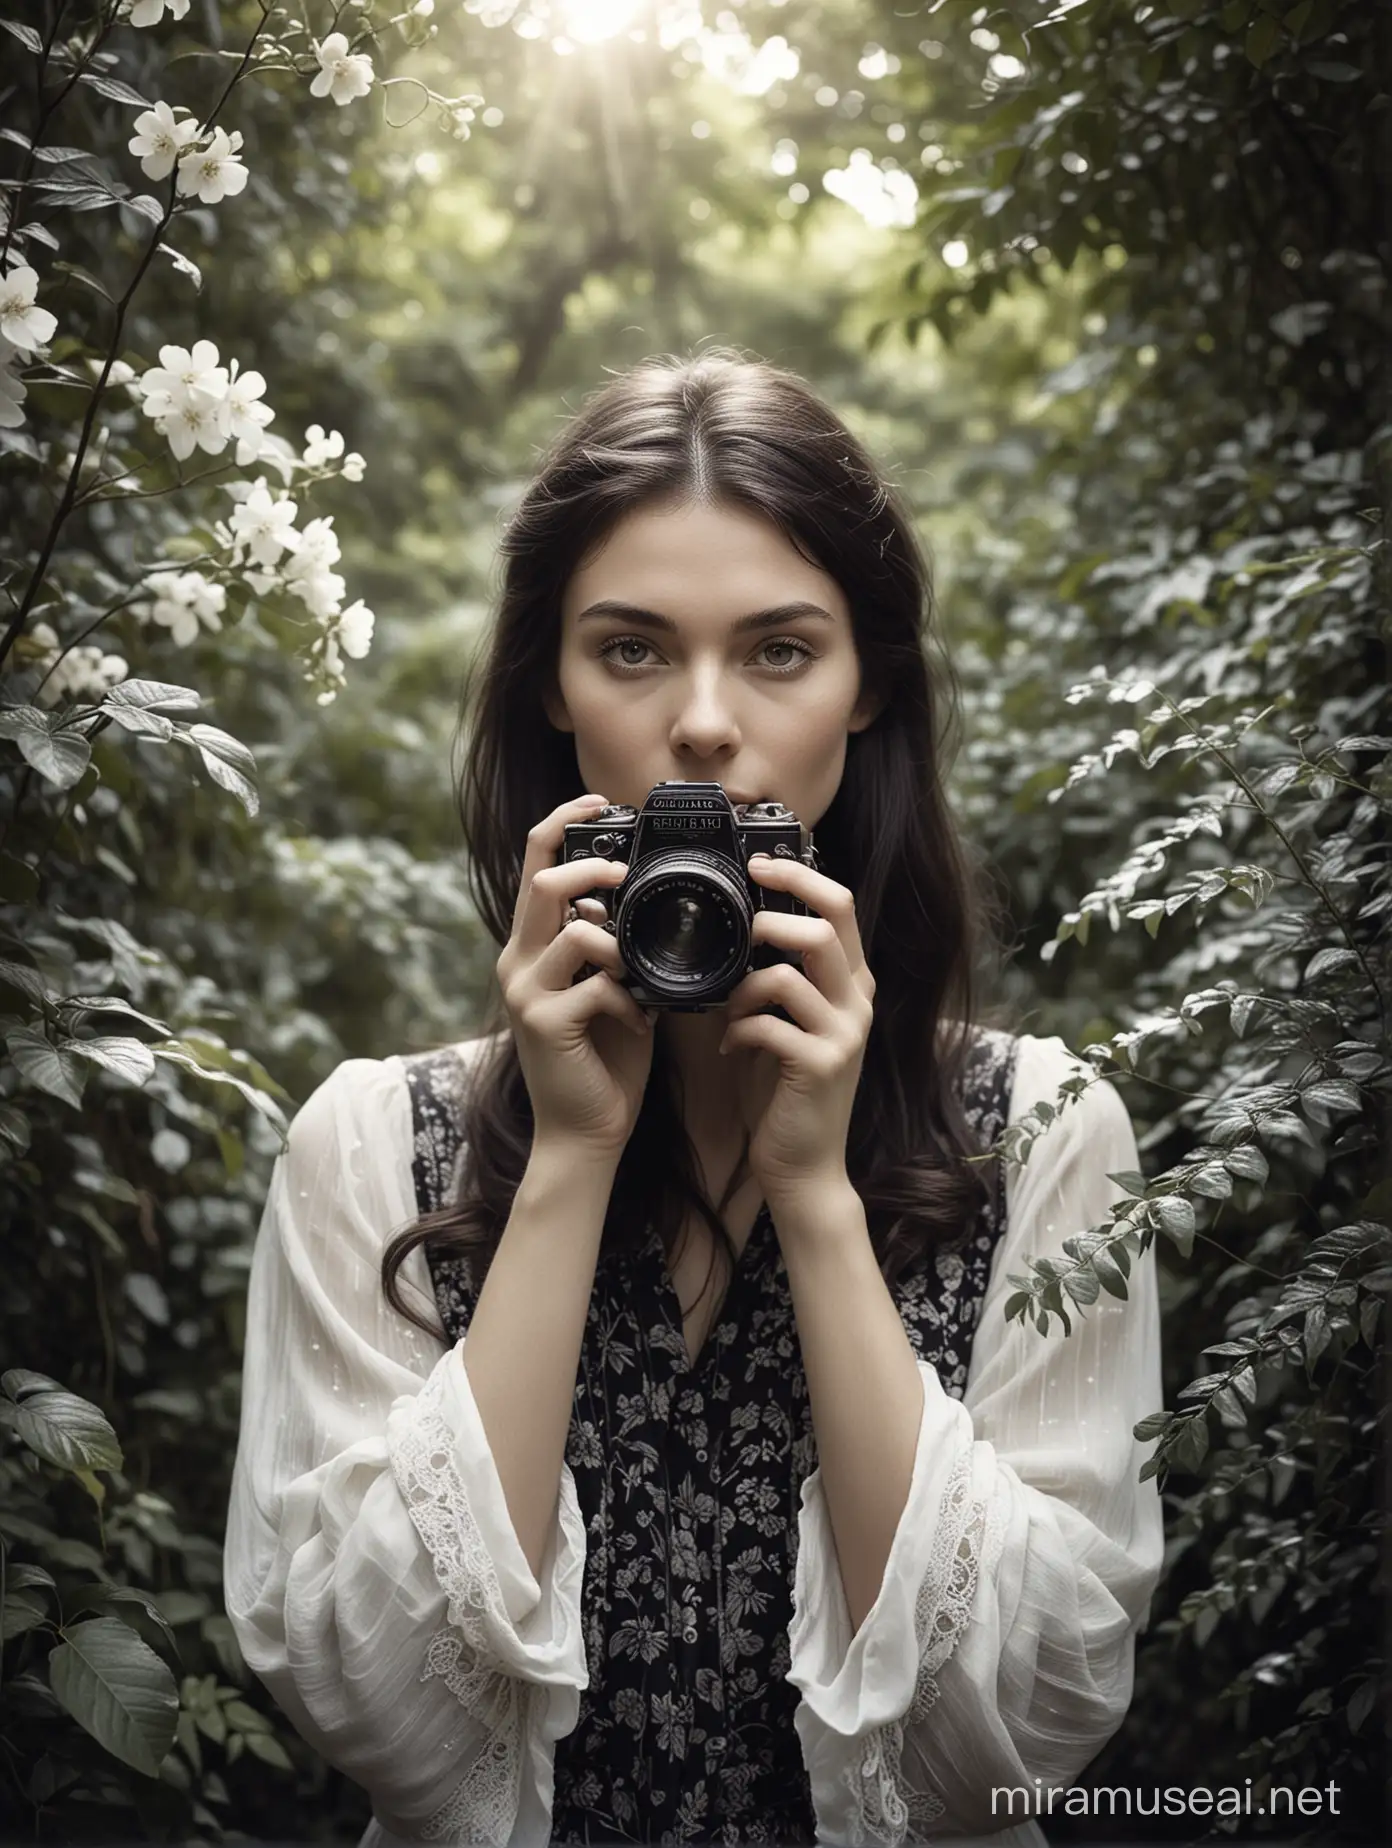 photographic, professional, Employing a vintage twin-lens reflex (TLR) camera with a fixed 75mm lens, immerse the viewer in the romantic ambiance of a secluded garden bathed in soft, dappled sunlight. Craft a dreamy black and white portrait of a lady amidst a lush botanical setting, where the natural elements serve as a harmonious backdrop to her ethereal presence. Experiment with composition, framing her amidst trailing vines or delicate blooms, and use shallow depth of field to create a sense of intimacy and connection with the viewer.